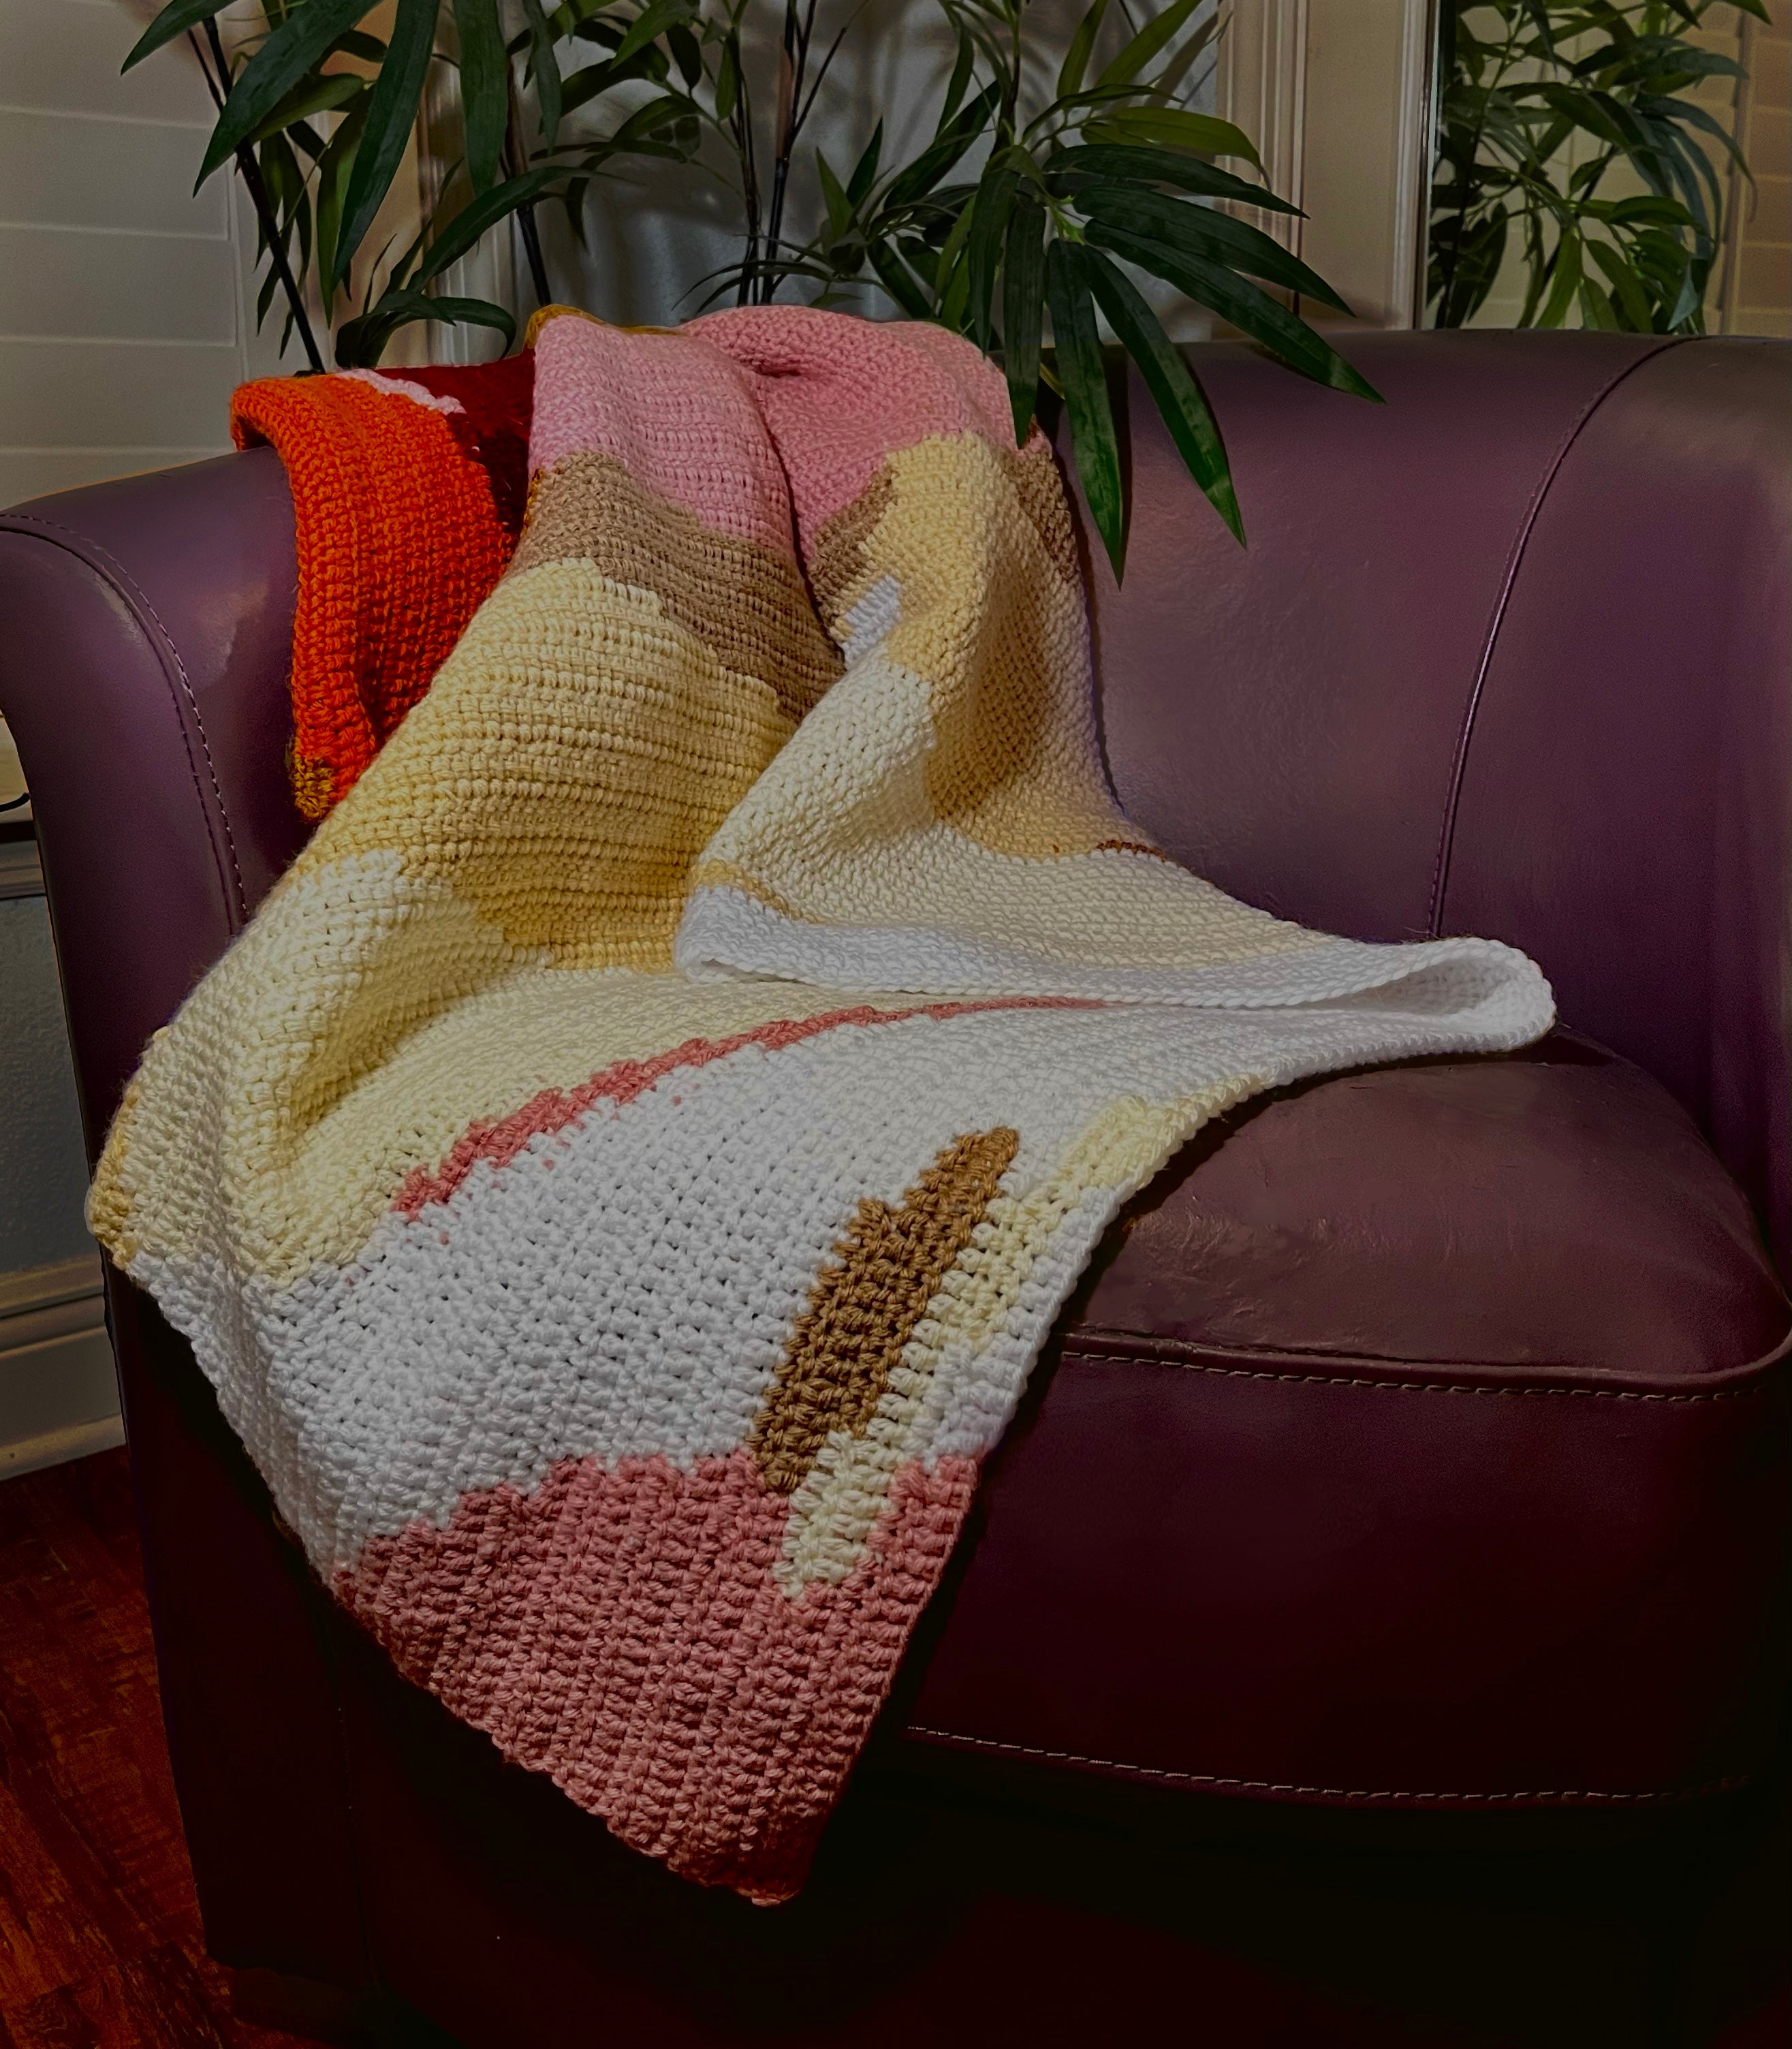 Crochet blanket with uneven stripes of orange, burgundy, pink, gold, tan, white, and off white draped over a purple leather chair.